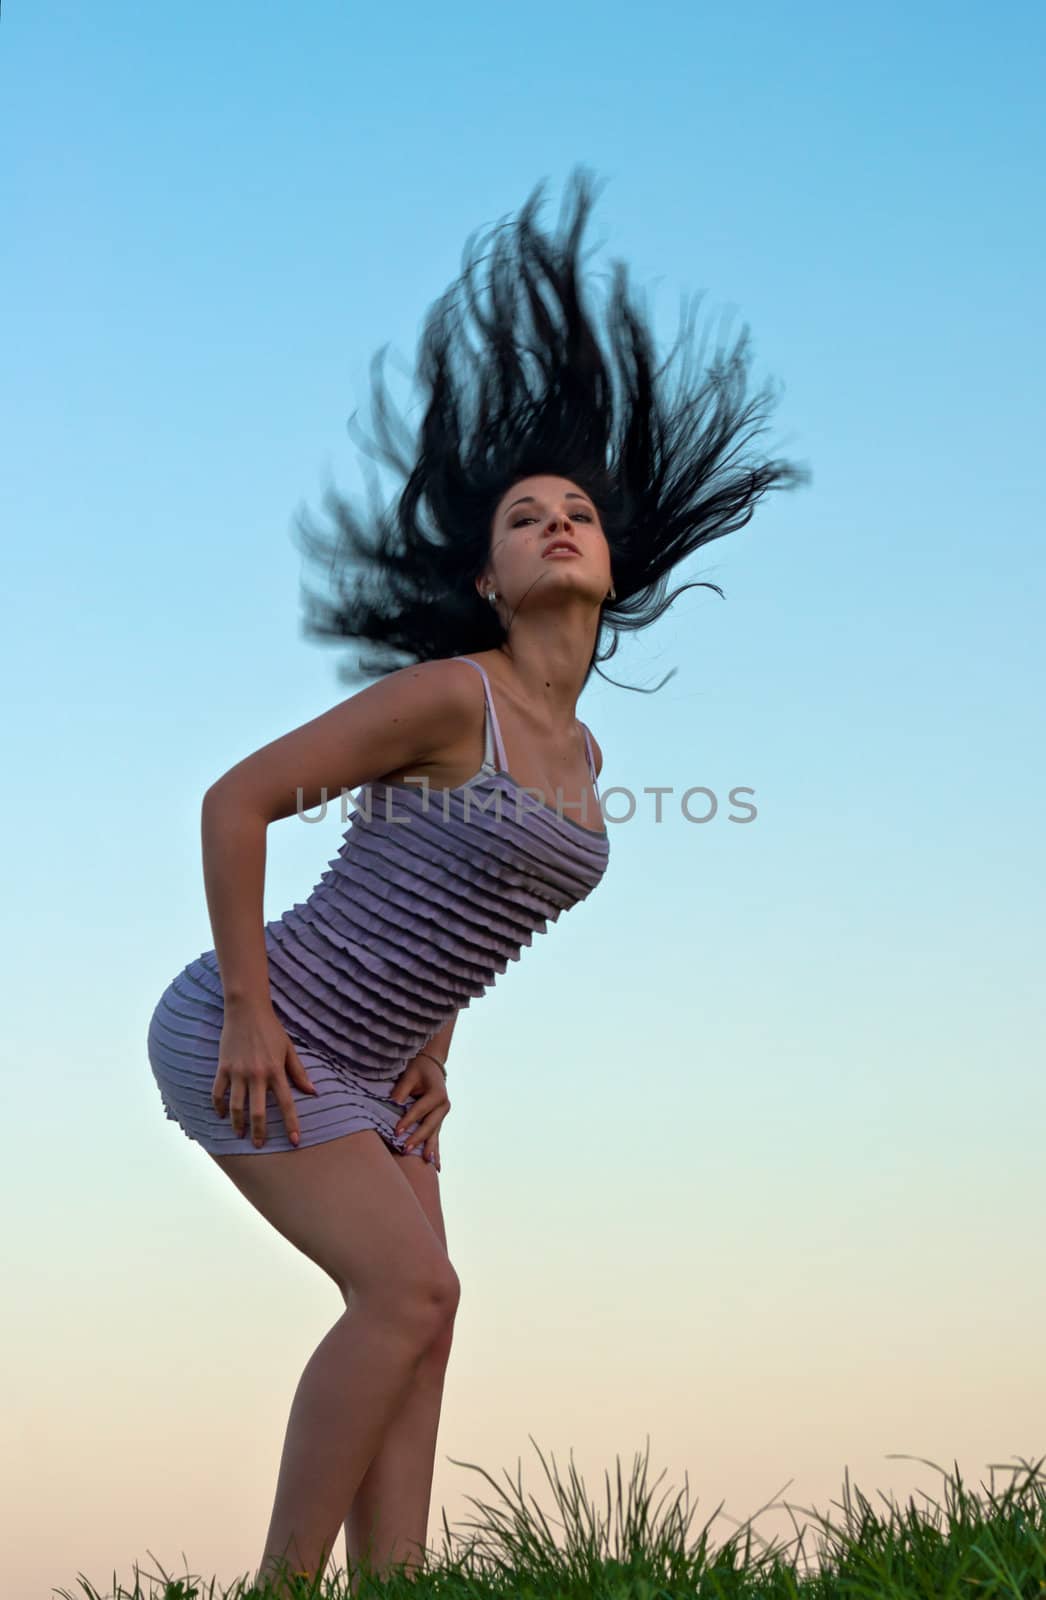 Girl with disheveled hair against evening sky.